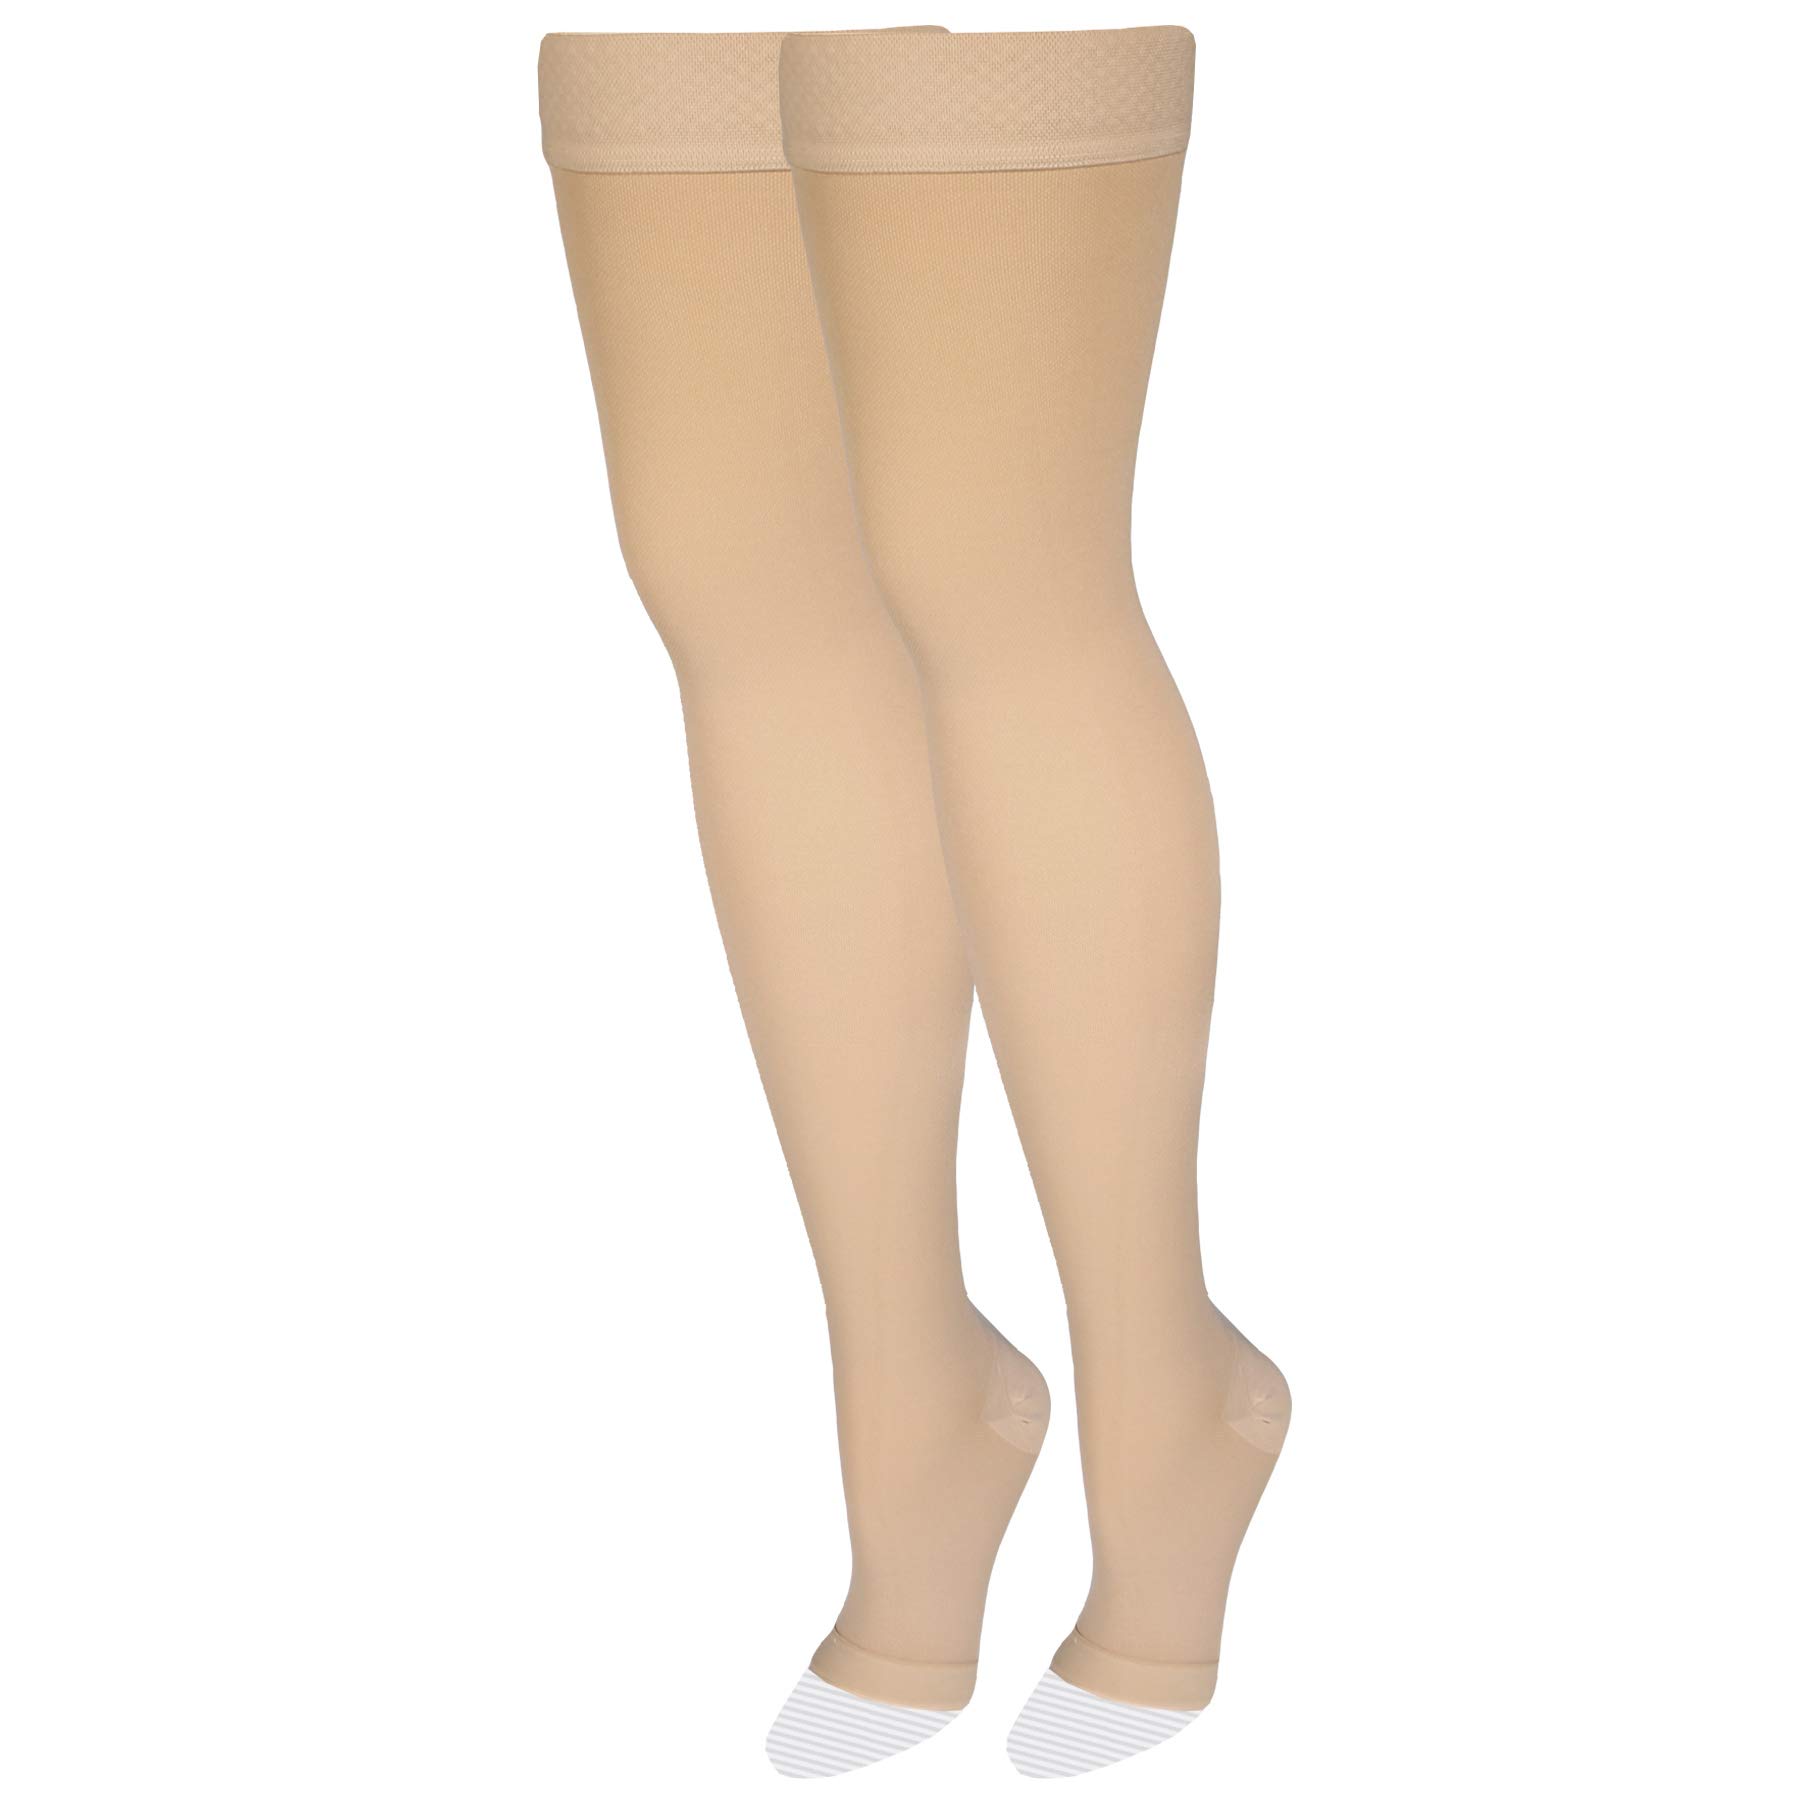 Amazon Basic Care Medical Compression Stockings, 20-30 mmHg Support, Women & Men Thigh Length Hose, Open Toe, Beige, 2X-Large (Previously NuVein)